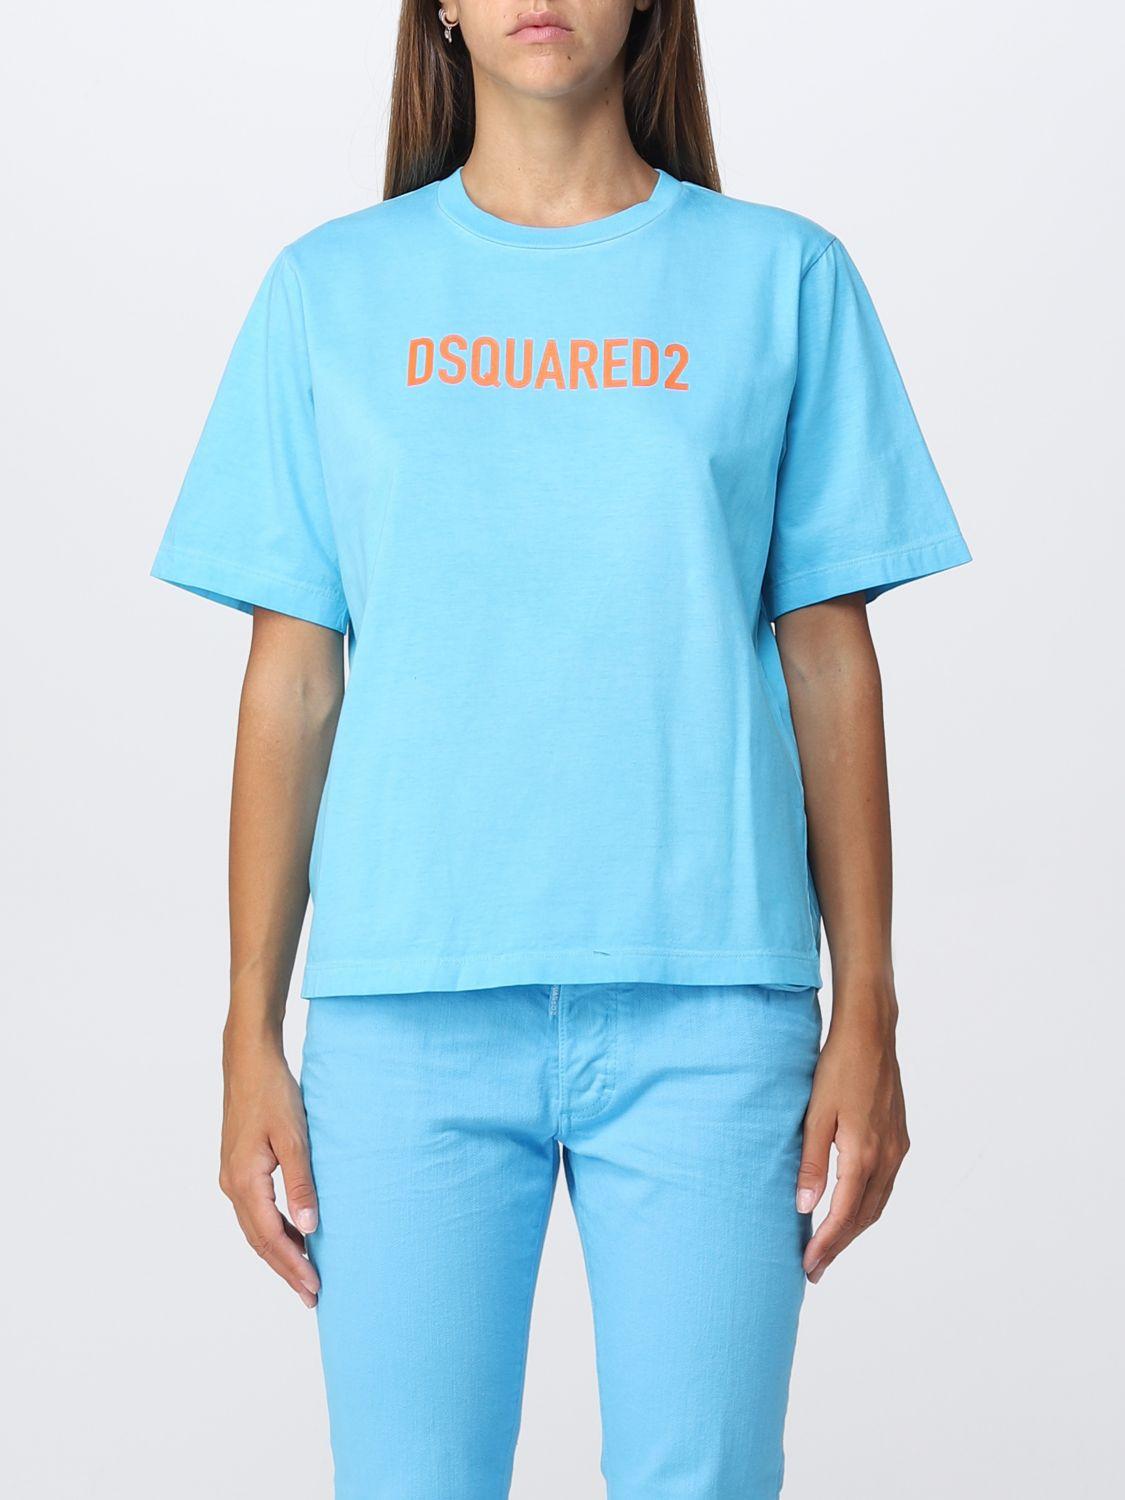 DSquared² T-shirt Woman in Sky Blue (Blue) | Lyst